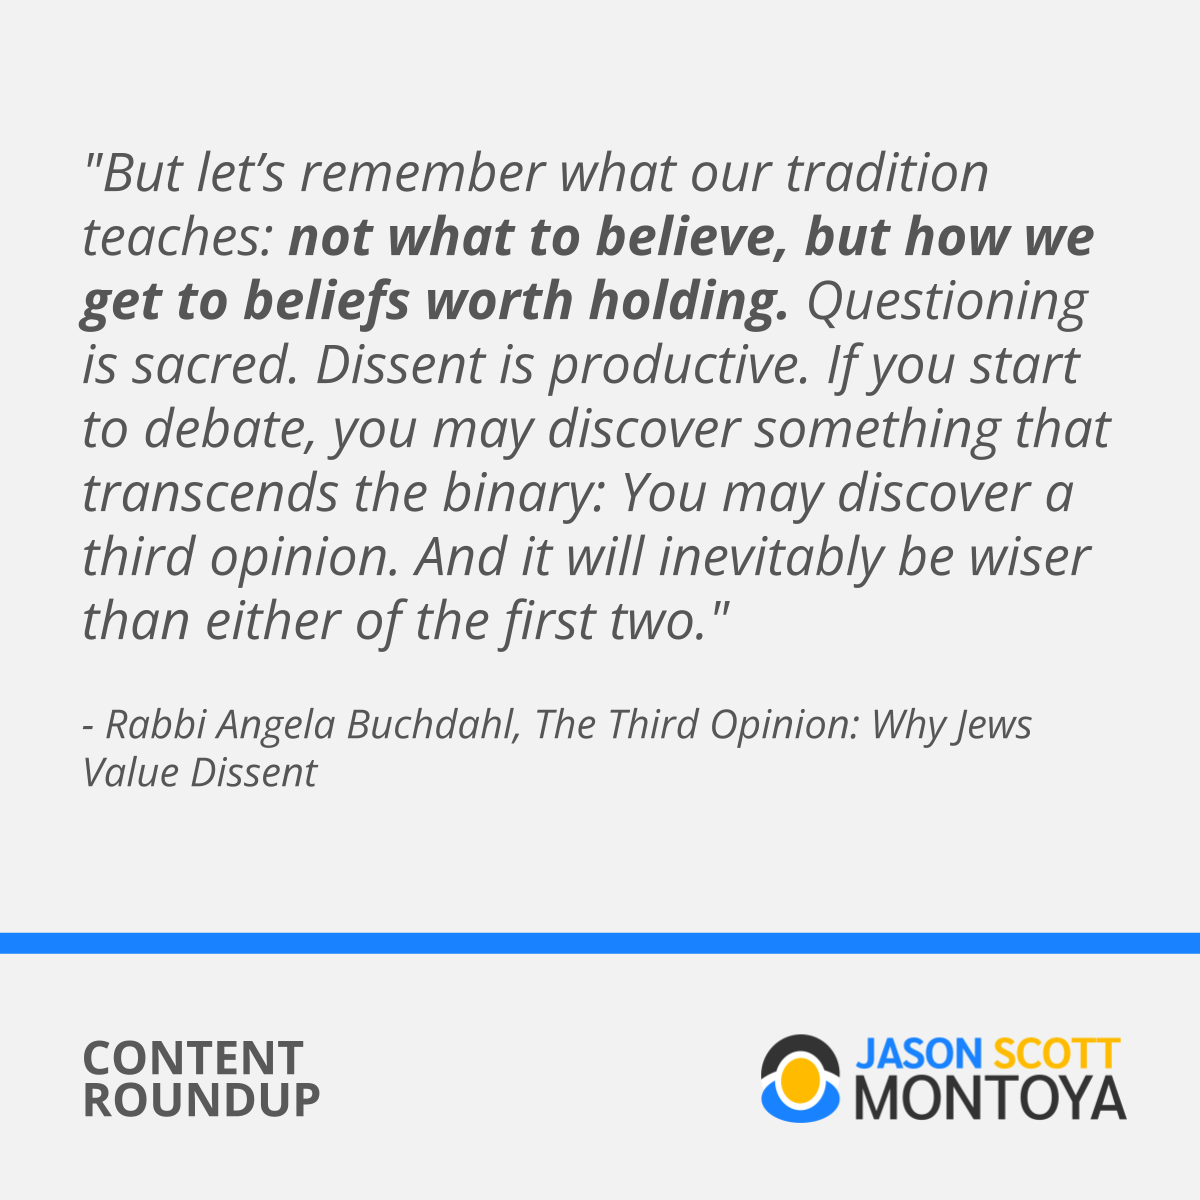 "But let’s remember what our tradition teaches: not what to believe, but how we get to beliefs worth holding. Questioning is sacred. Dissent is productive. If you start to debate, you may discover something that transcends the binary: You may discover a third opinion. And it will inevitably be wiser than either of the first two." - Rabbi Angela Buchdahl